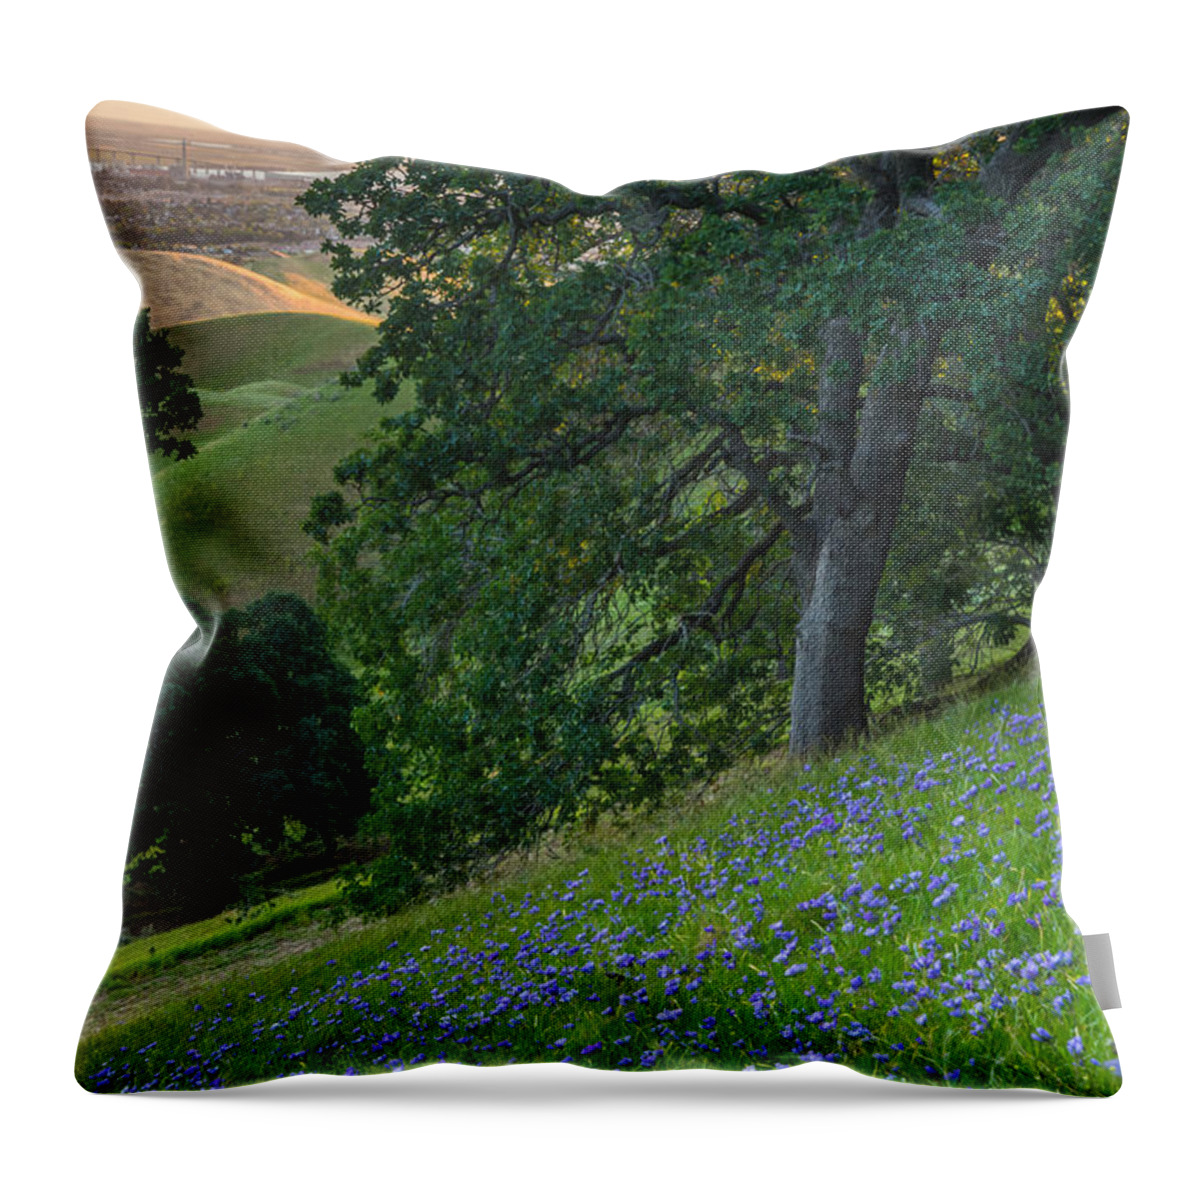 Landscape Throw Pillow featuring the photograph Hillside Flowers at Sunrise by Marc Crumpler